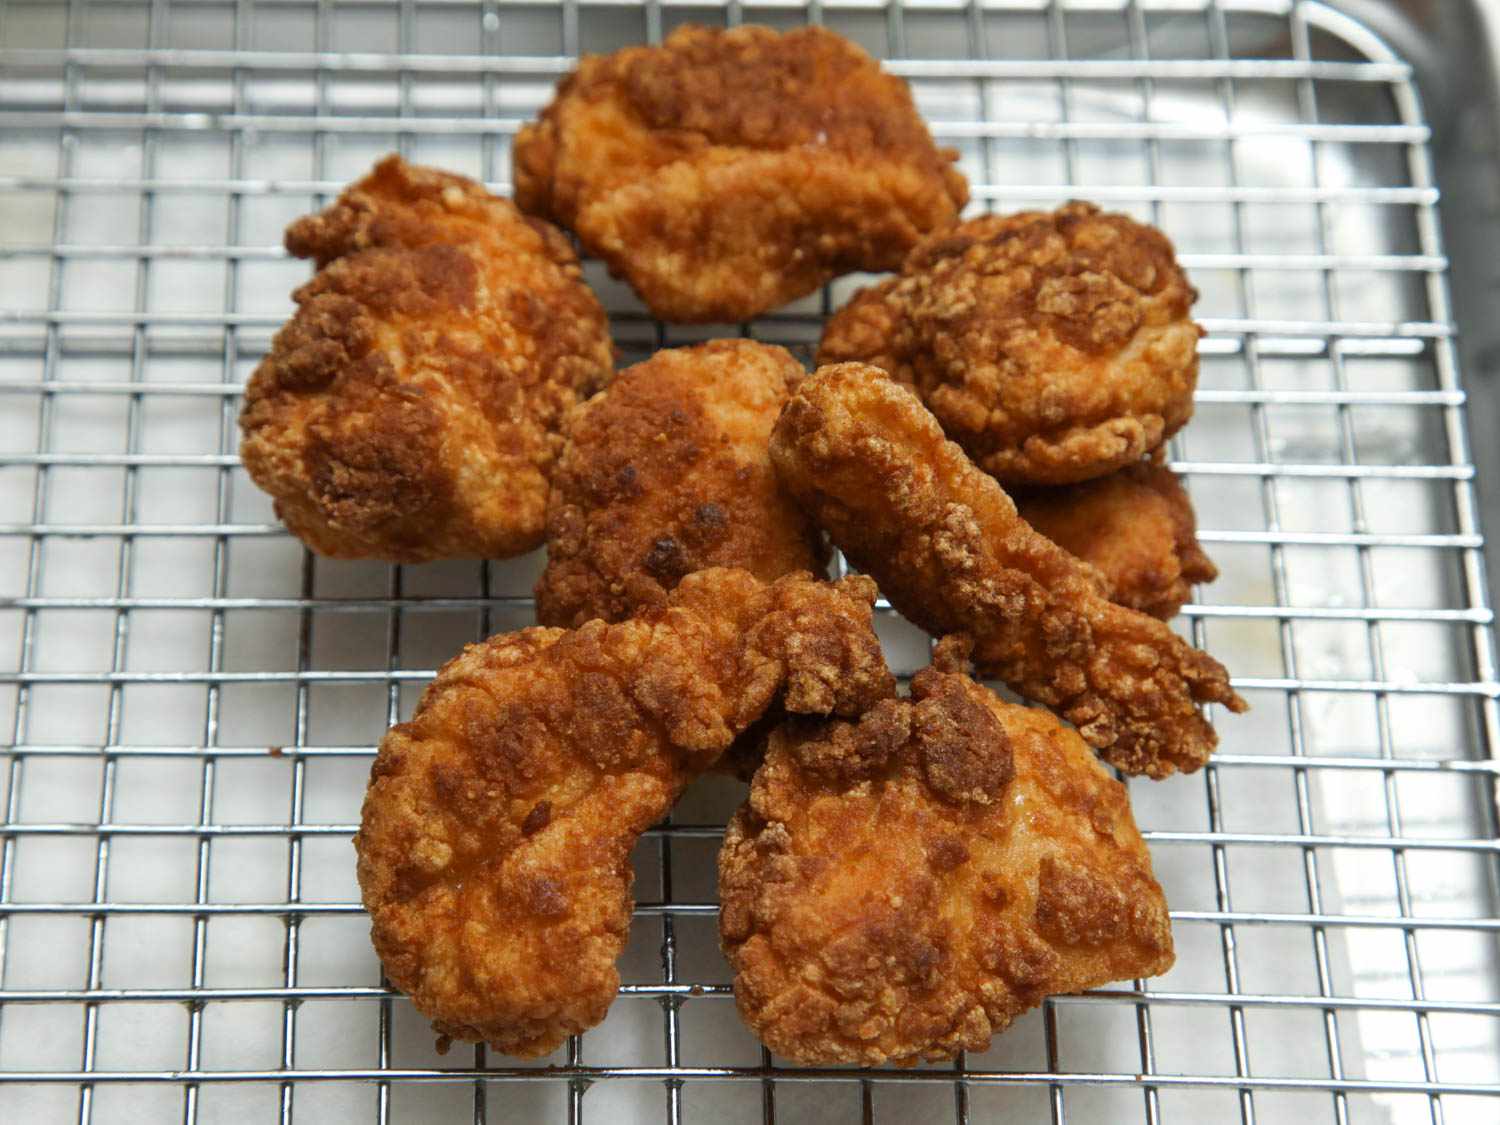 Breaded and fried boneless thighs coated like chicken nuggets.